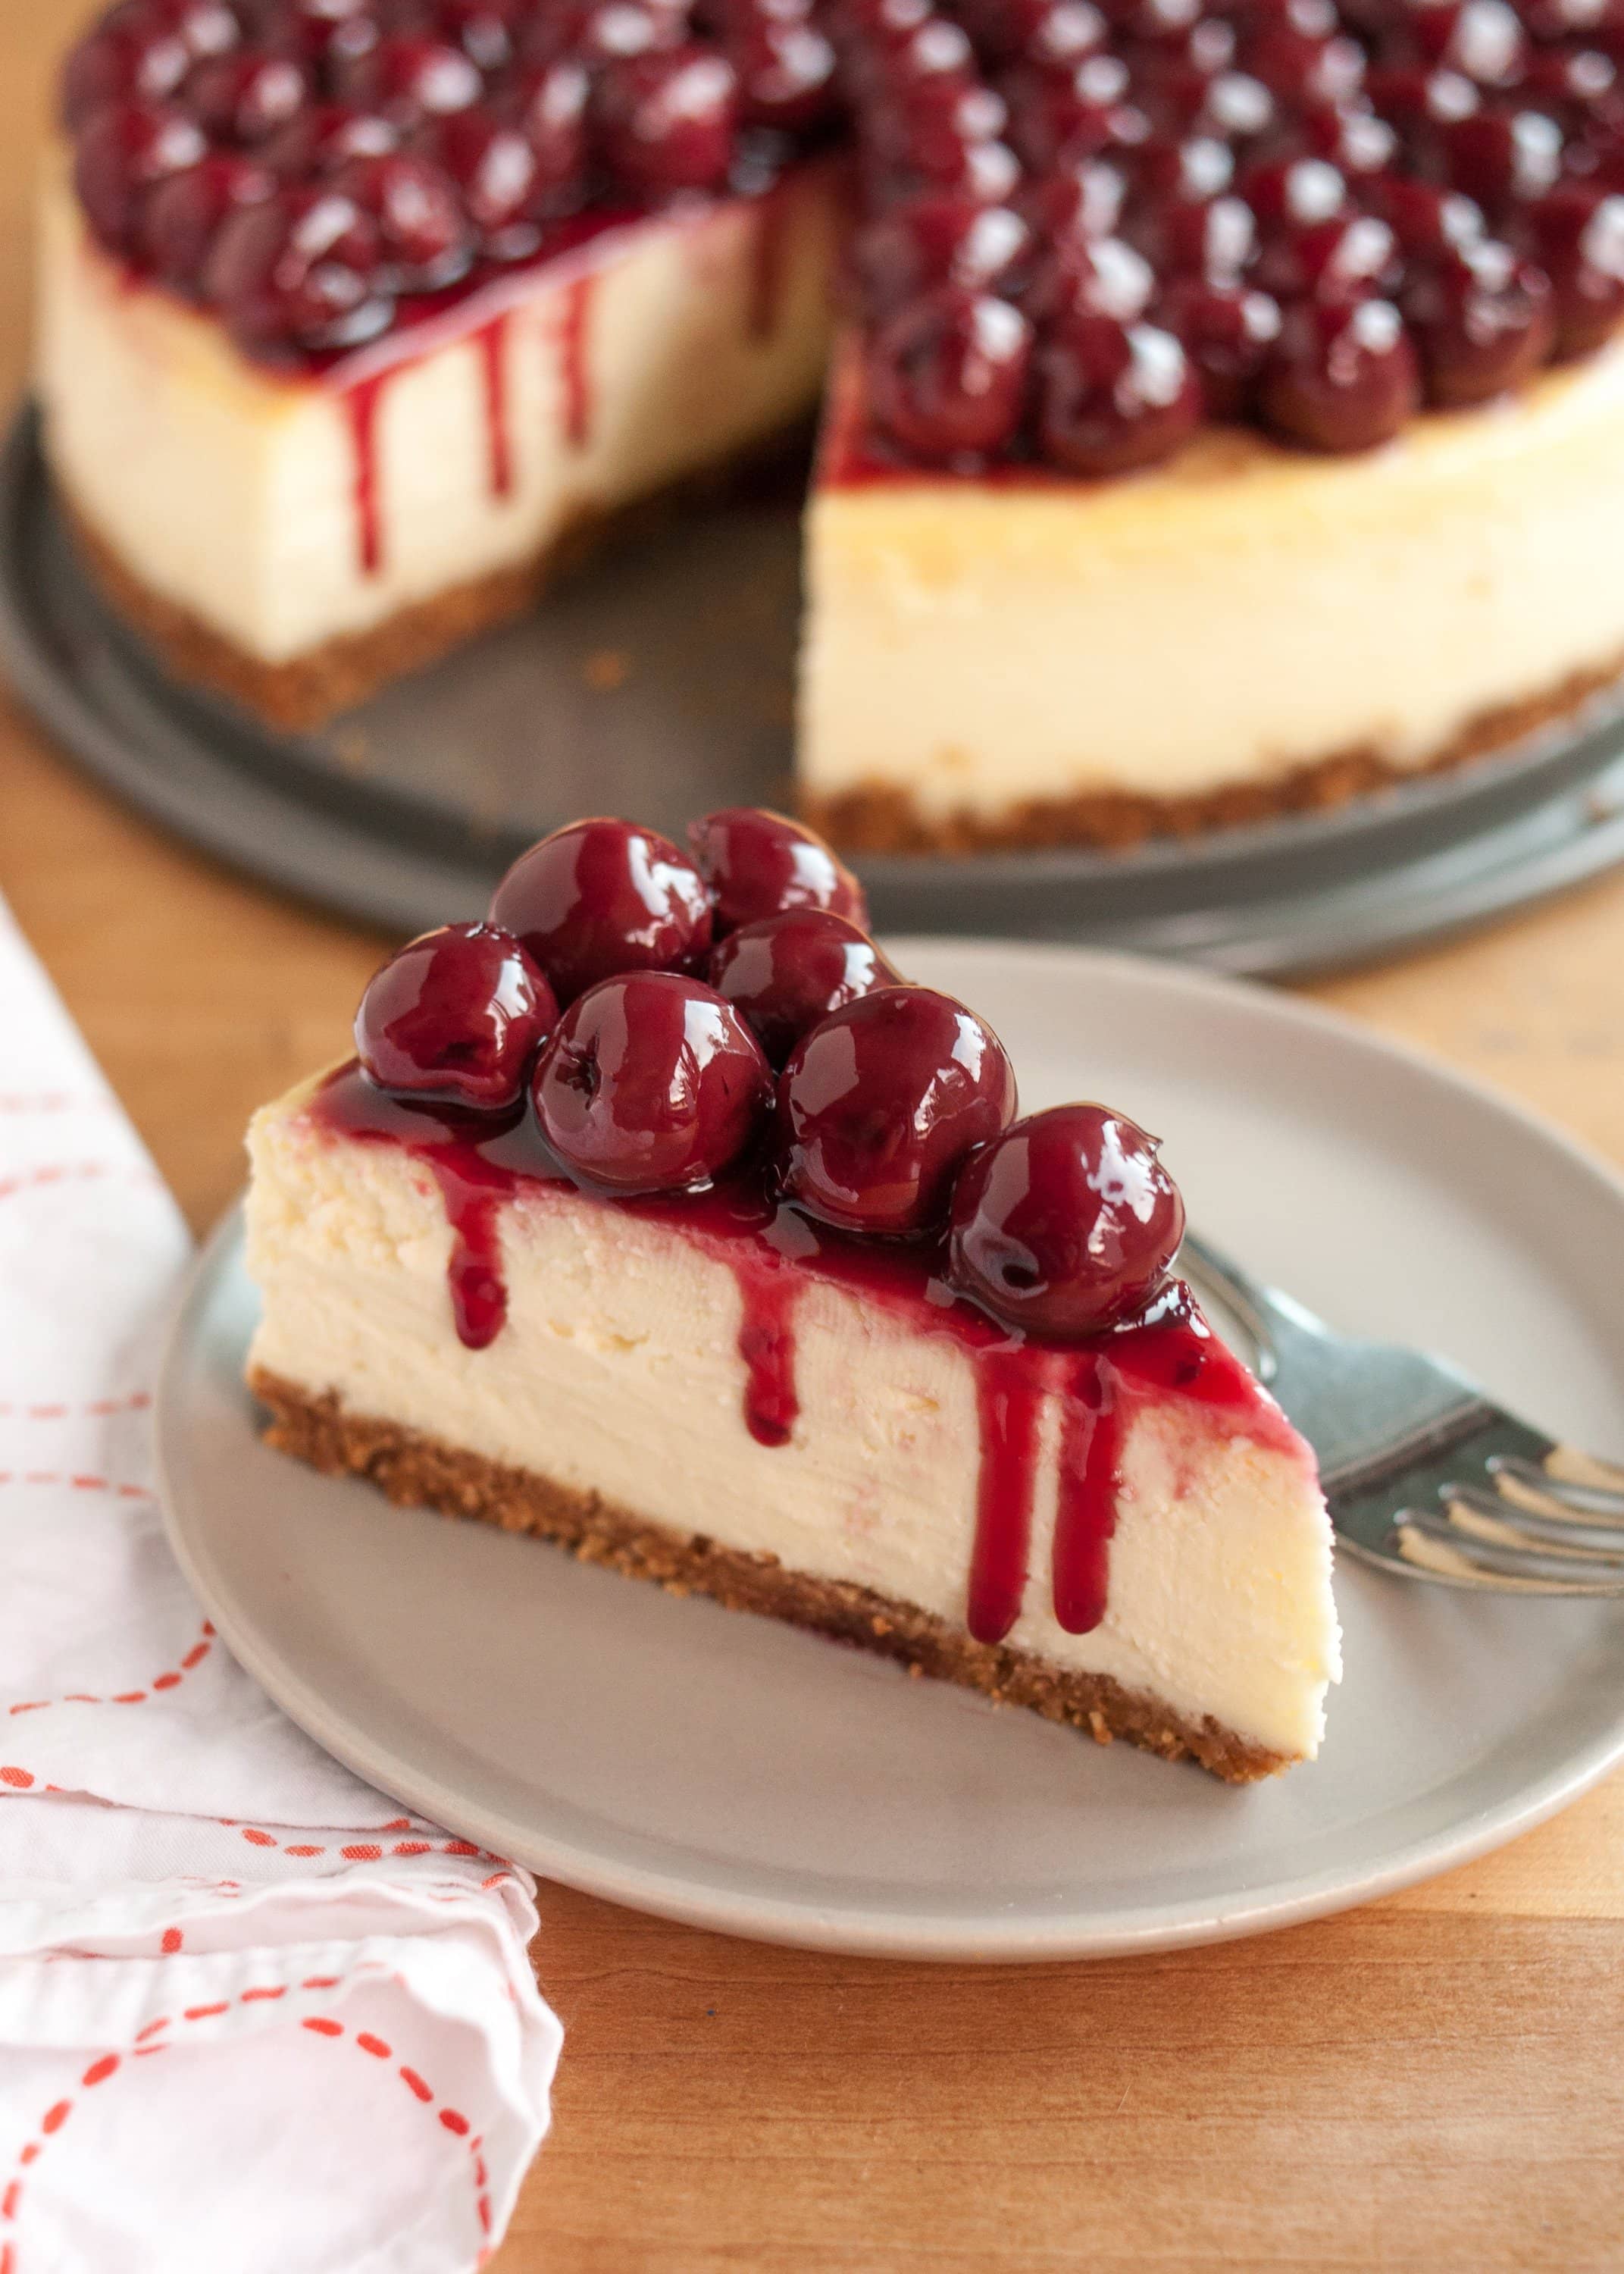 RUSTIC PRESSED COTTAGE CHEESE CHEESECAKE Recipe Cottage cheese